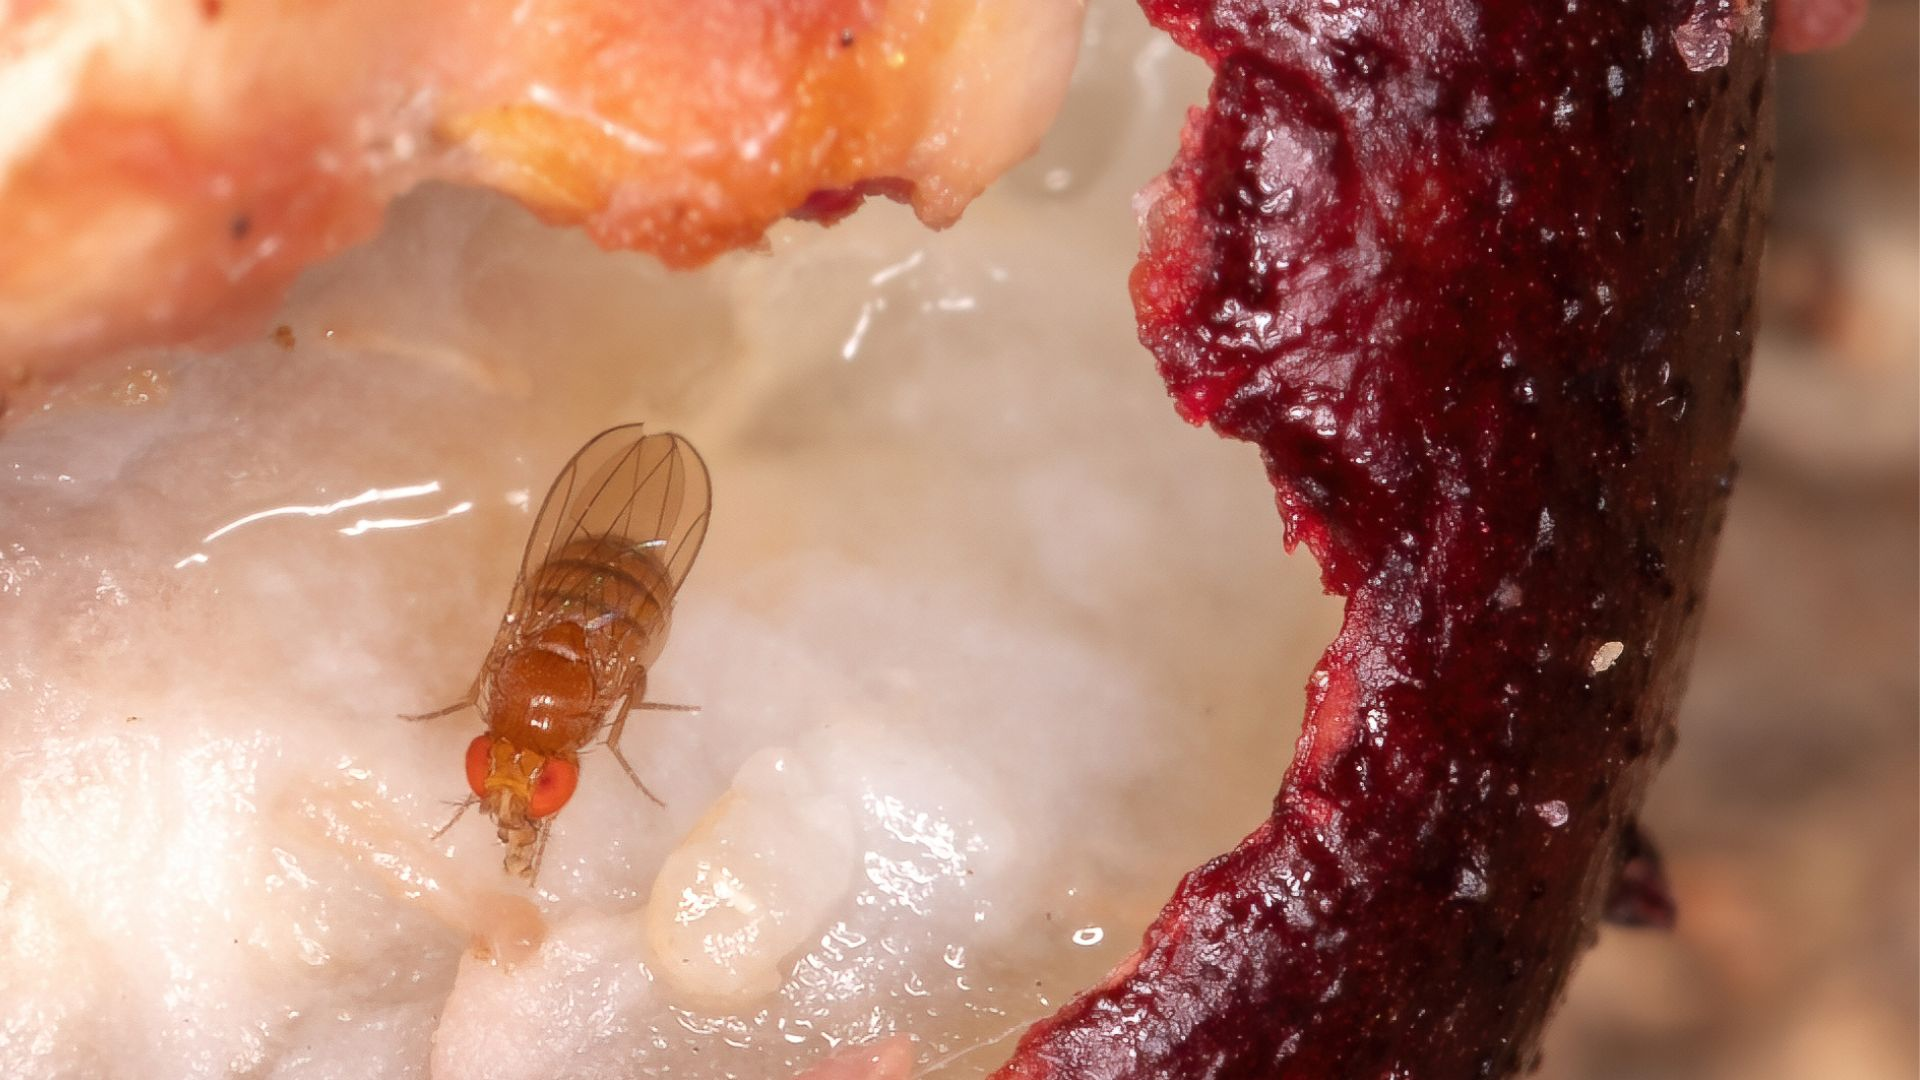 How to Get Rid of Fruit Flies in a Grocery Store